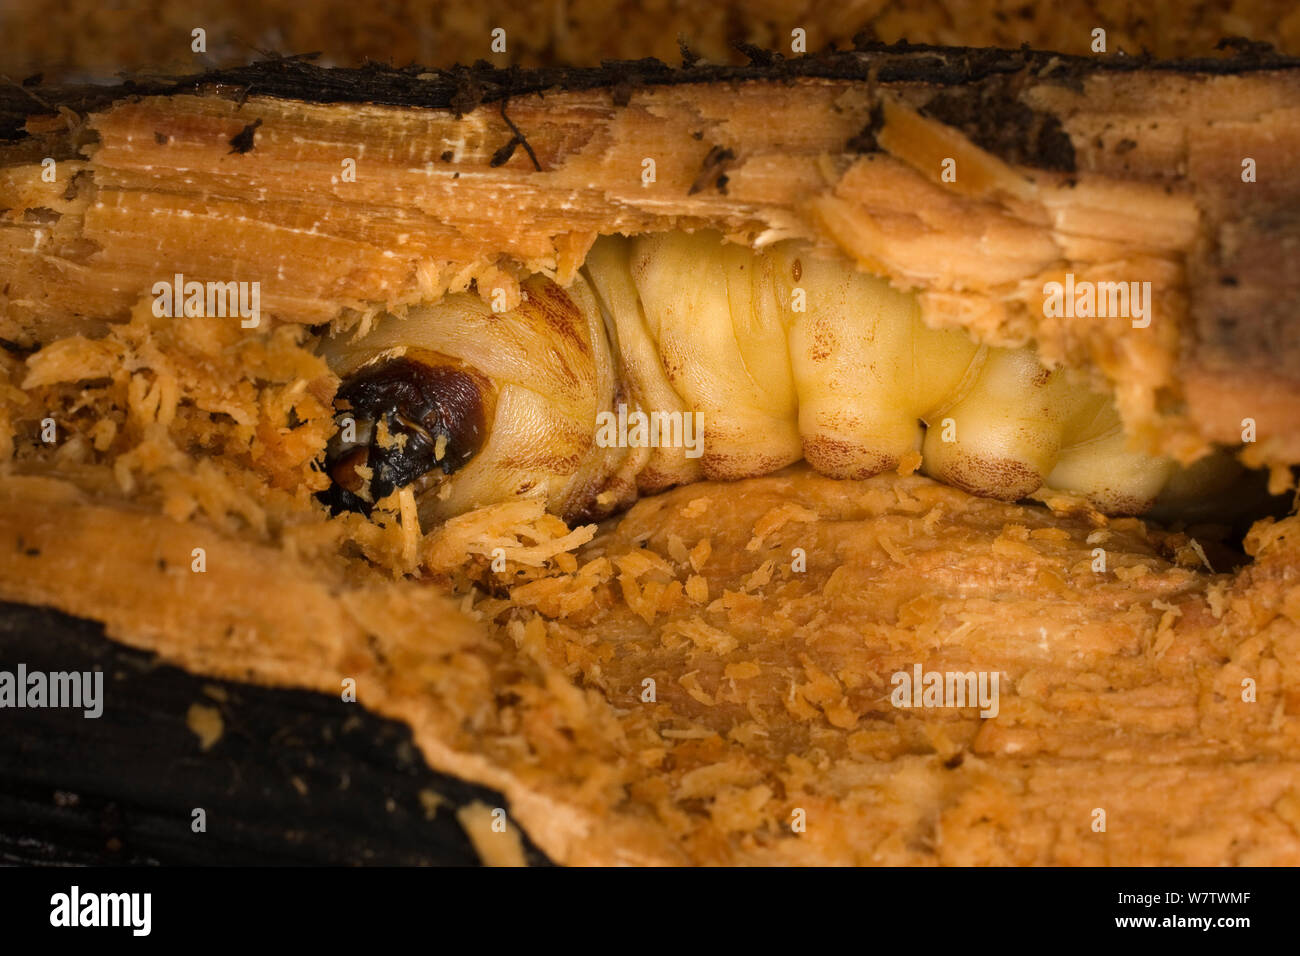 Giant root borer beetle (Prionus californicus) larva boring through decaying soft wood, Colevlle National Forest, Washington, USA, October. Stock Photo